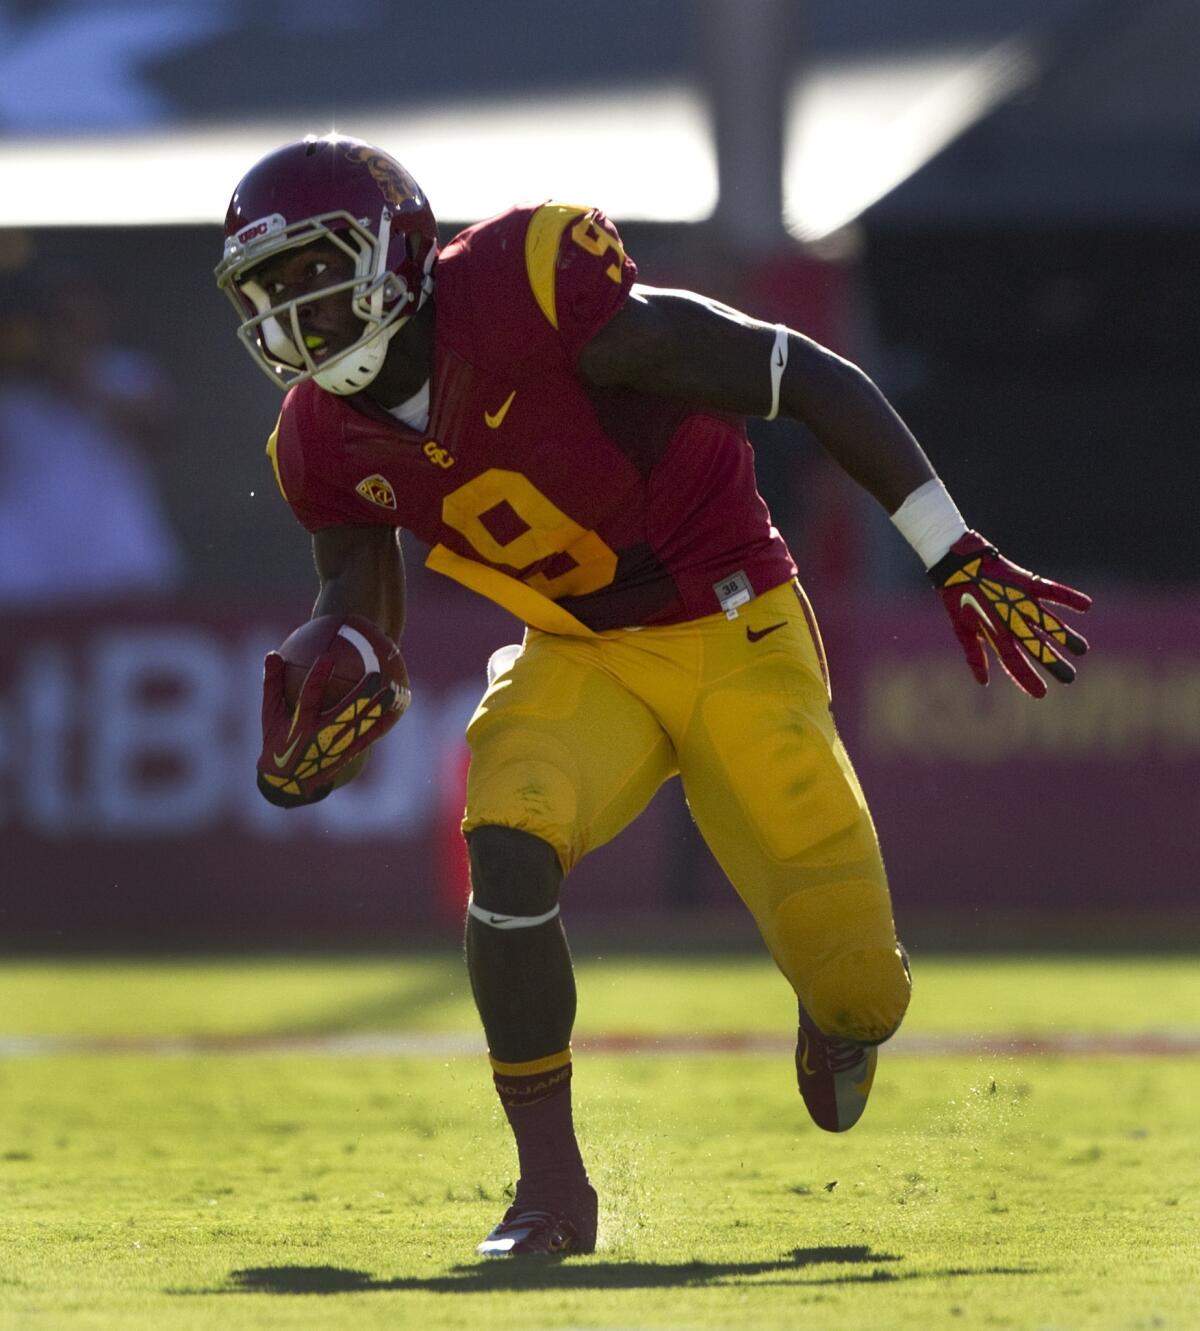 An injury forced USC wide receiver Marqise Lee to miss Saturday's team practice session.